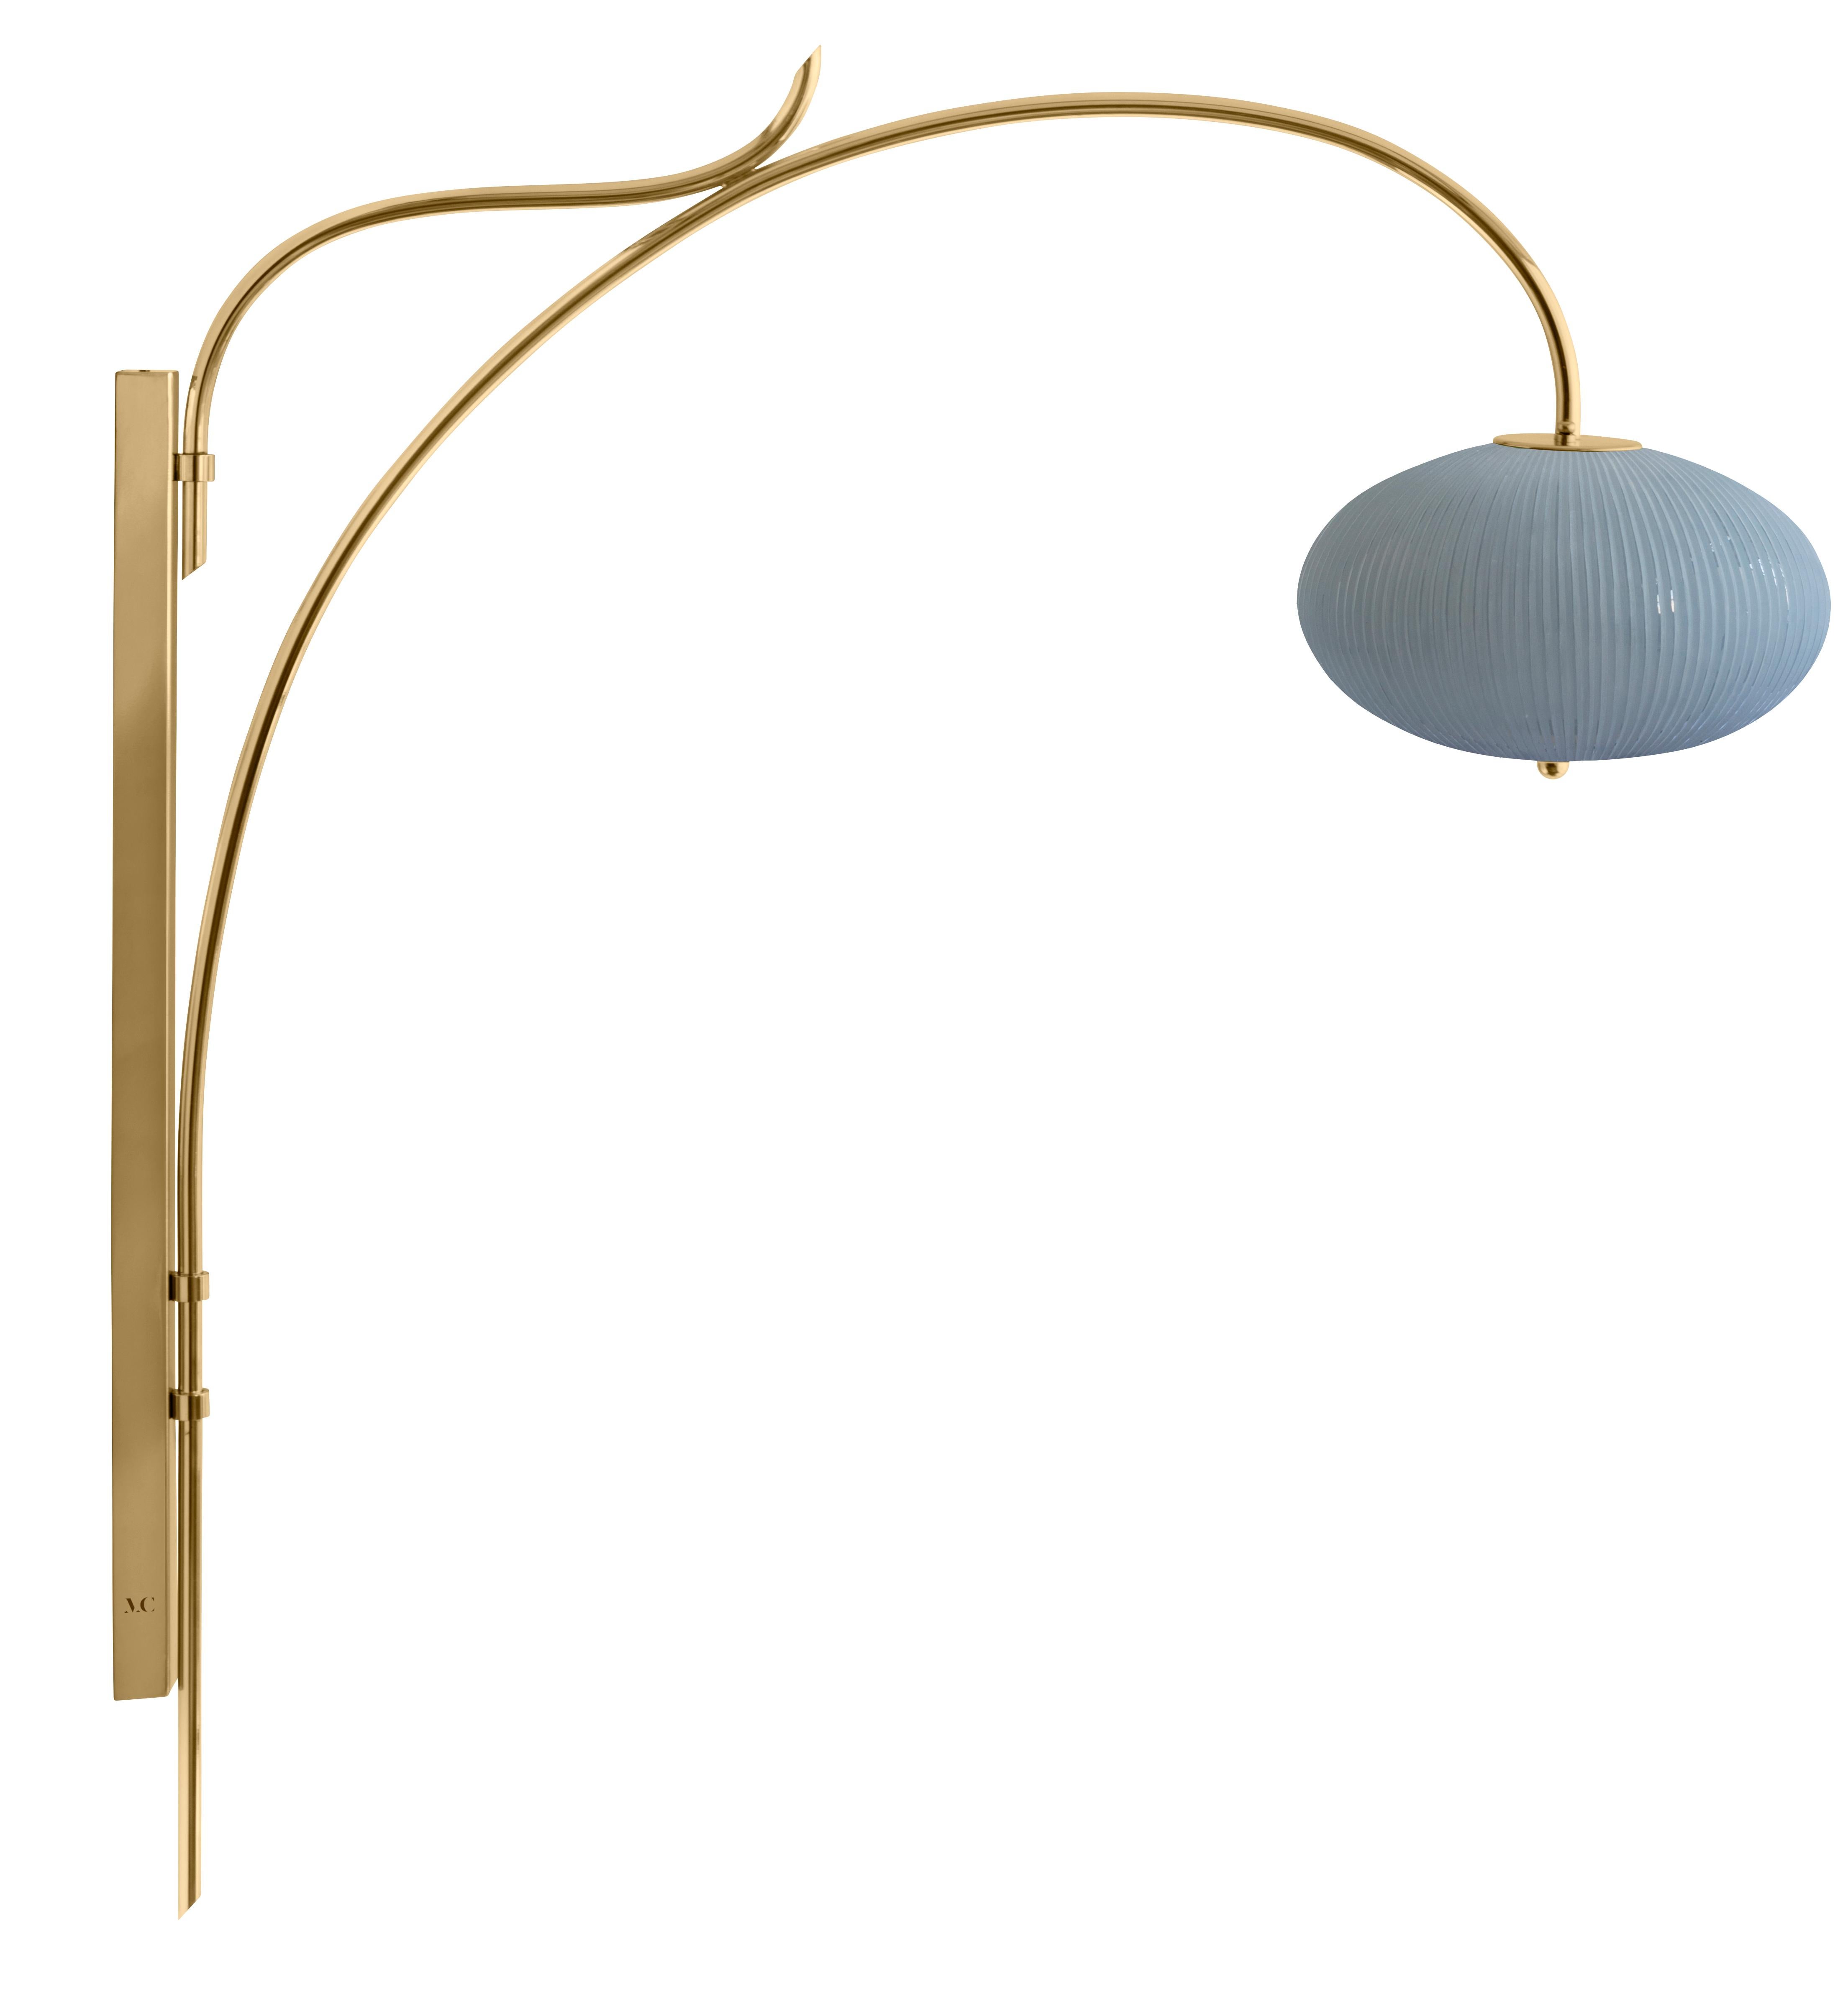 Wall lamp China 07 by Magic Circus Editions.
Dimensions: H 120 x W 32 x D 113.5 cm.
Materials: brass, mouth blown glass sculpted with a diamond saw.
Colour: opal grey.

Available finishes: brass, nickel.
Available colours: enamel soft white,